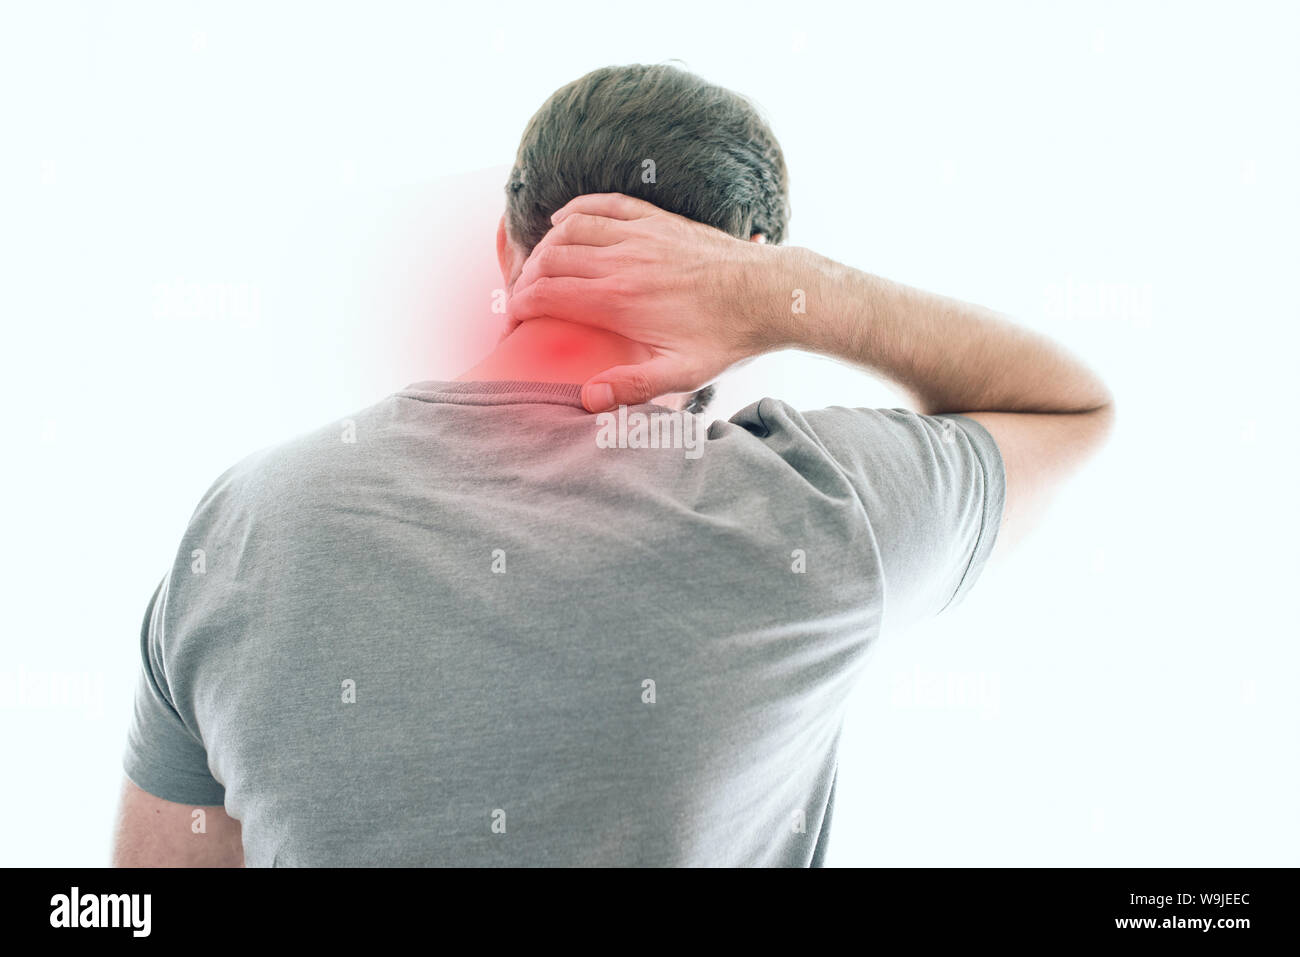 rear view of man suffering from neck pain Stock Photo